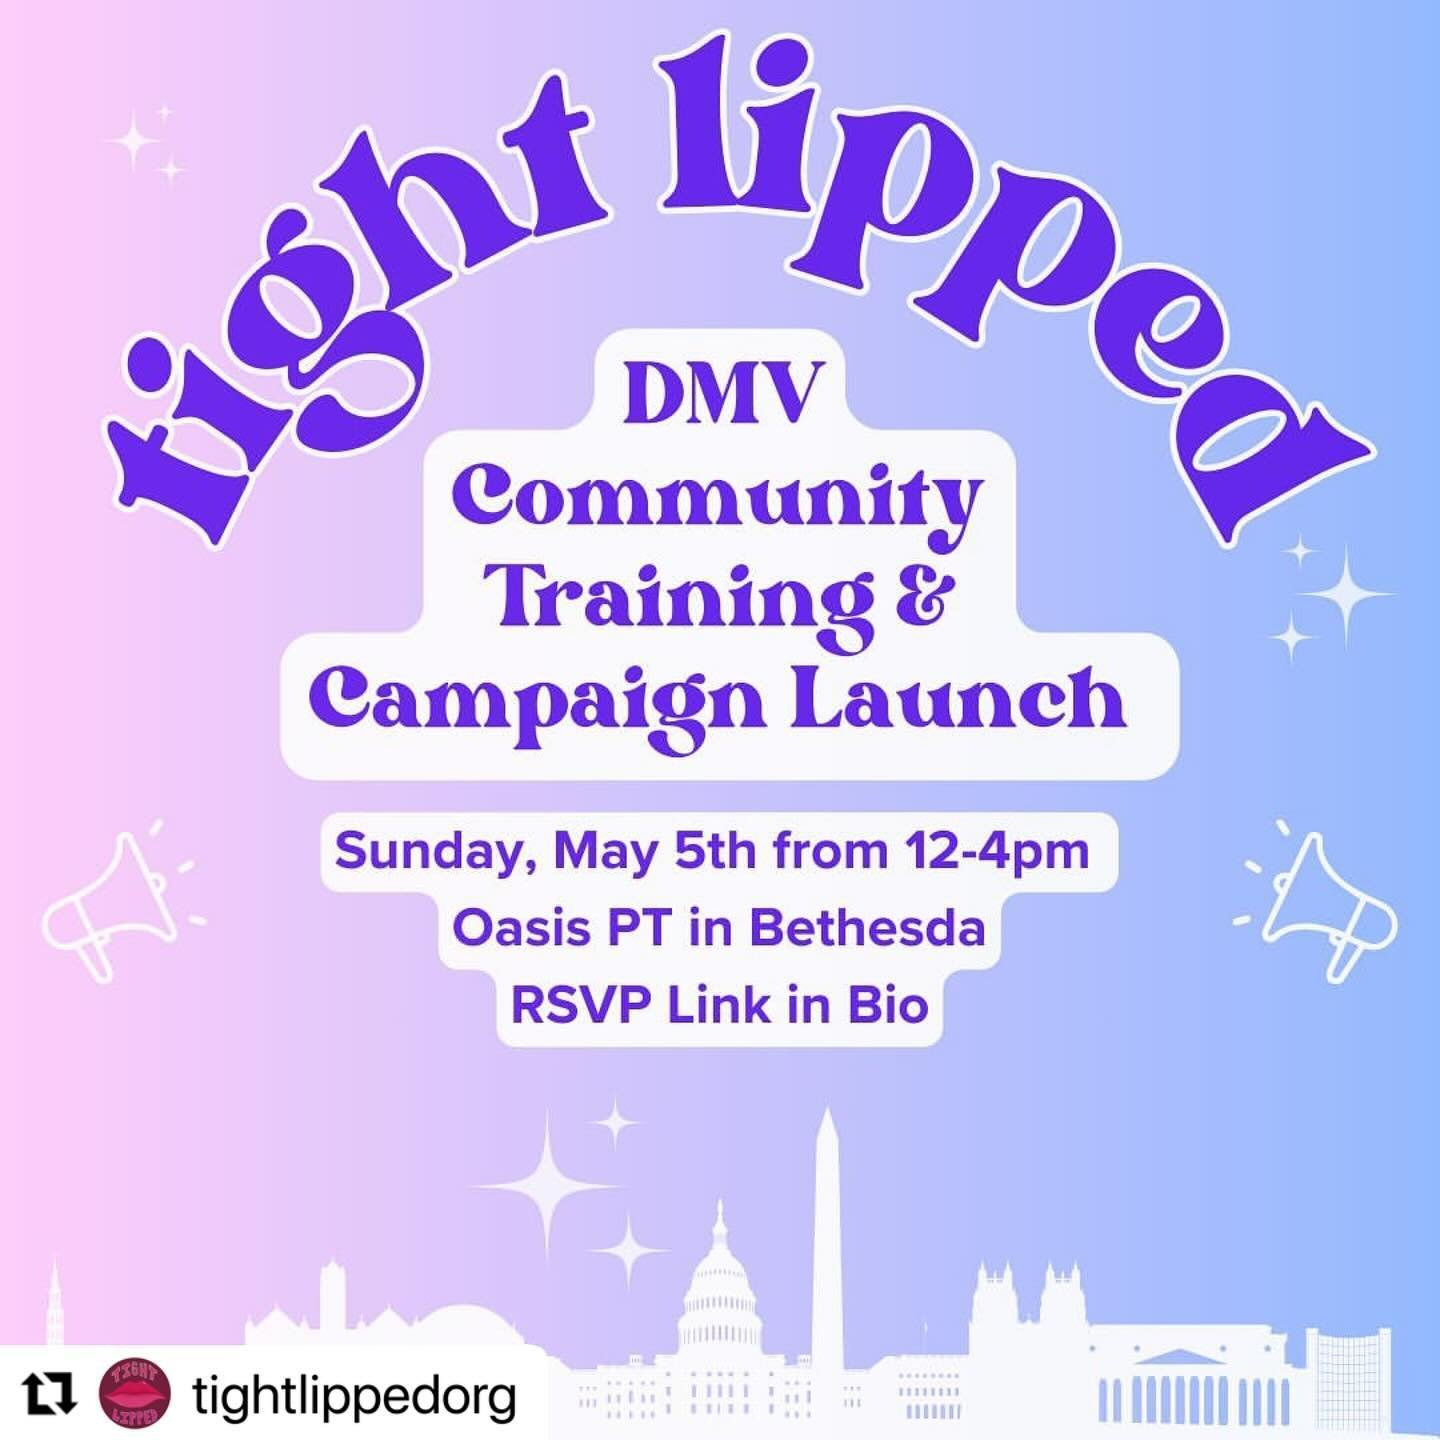 #Repost @tightlippedorg with @use.repost
・・・
We&rsquo;re doing it! Tight Lipped is officially launching our DMV chapter, with our kickoff training May 5th from 12-4pm 🤩

Join us at @oasis.pelvicpt in Bethesda for an afternoon of sharing stories with